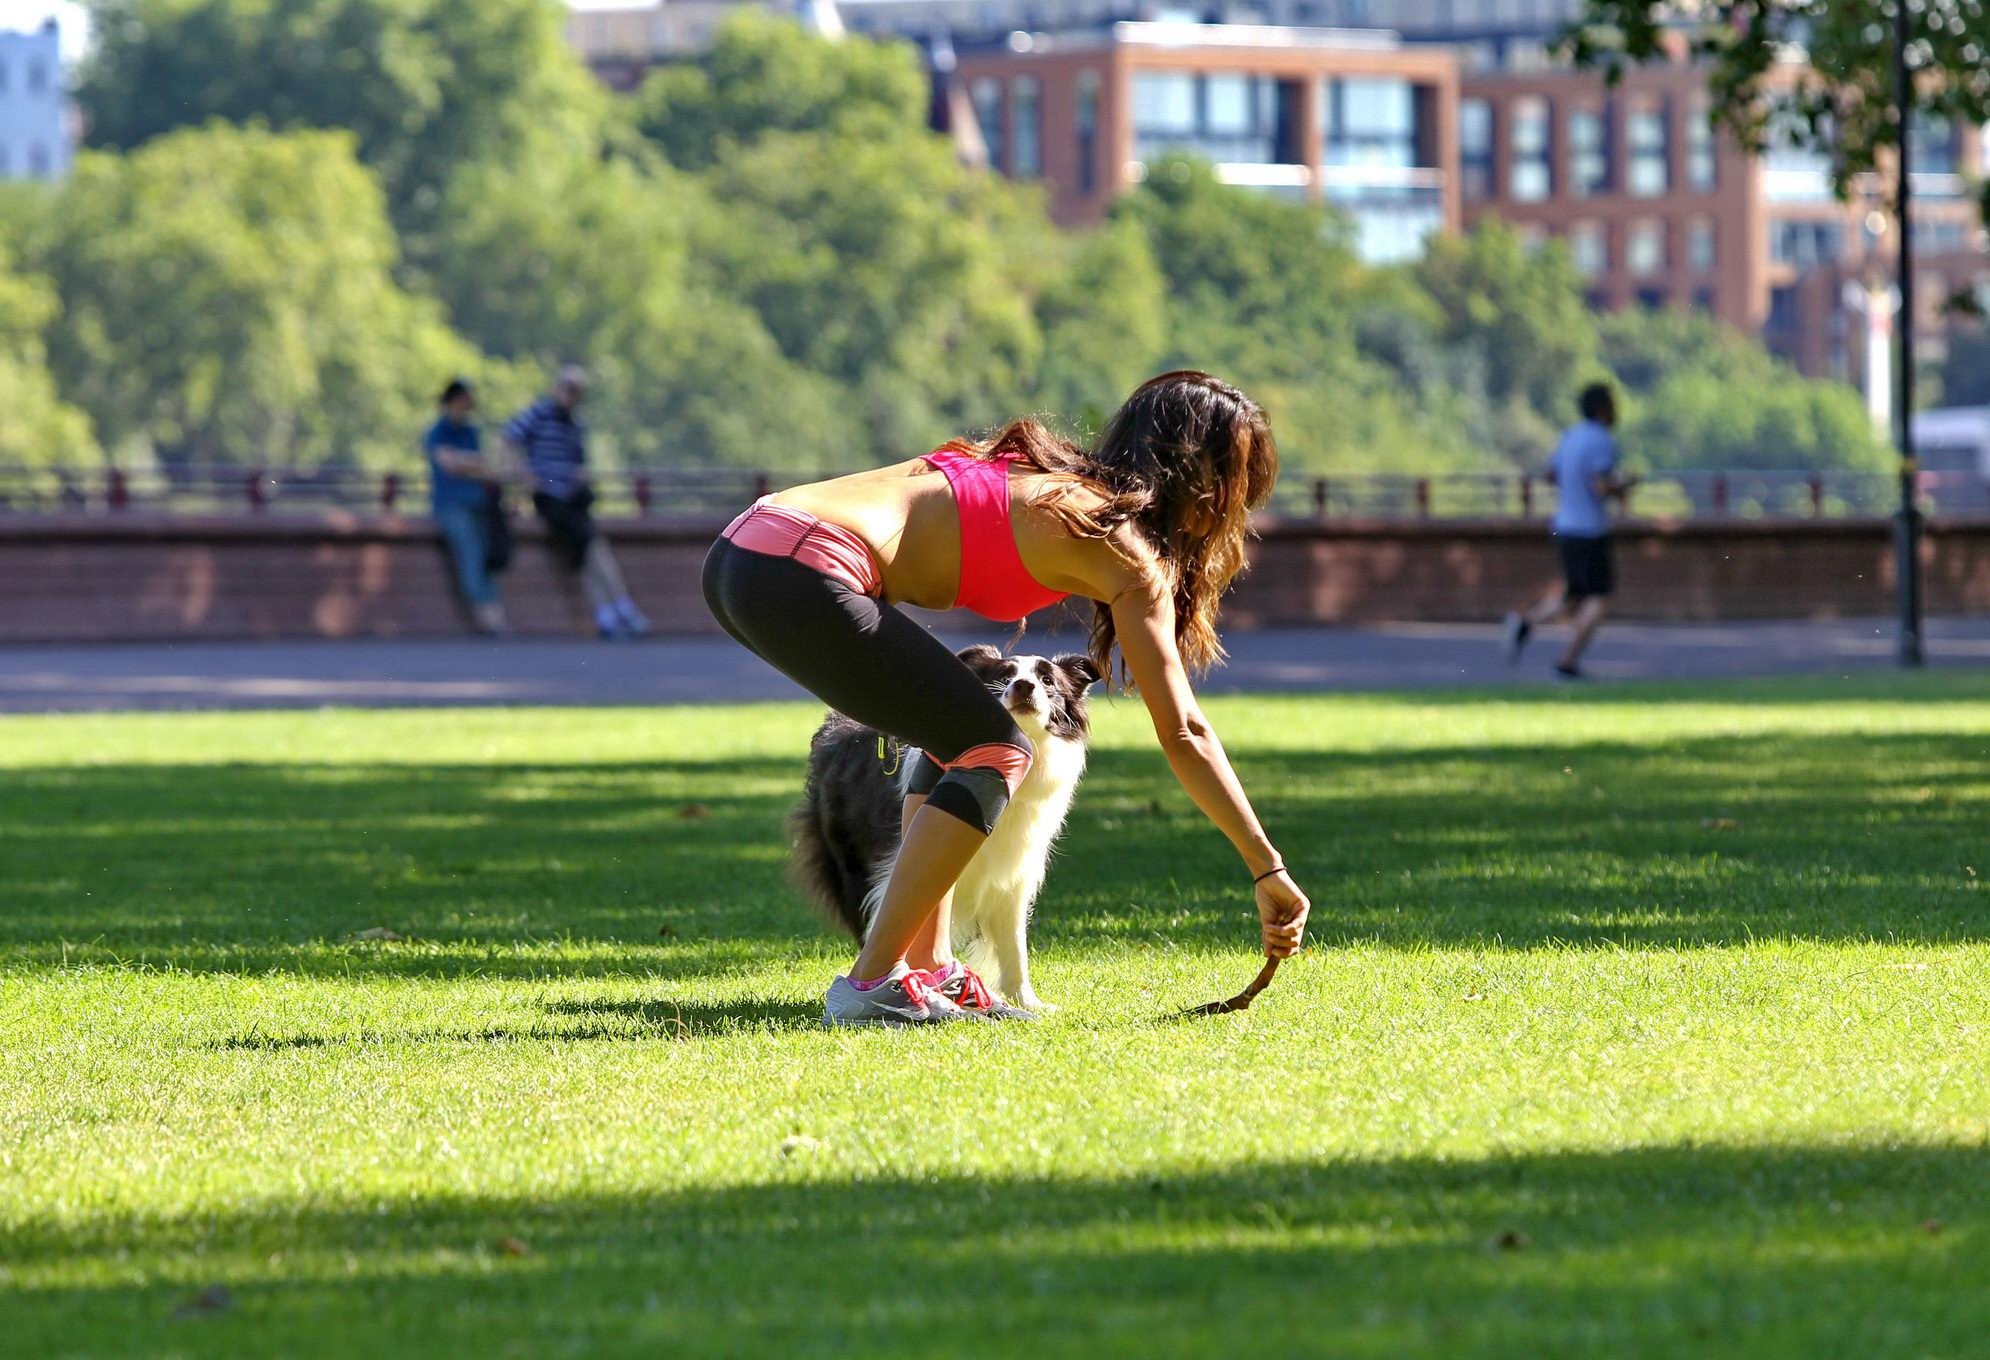 Leilani Dowding showing off her abs and bony ass while jogging with her doggy at #75189758